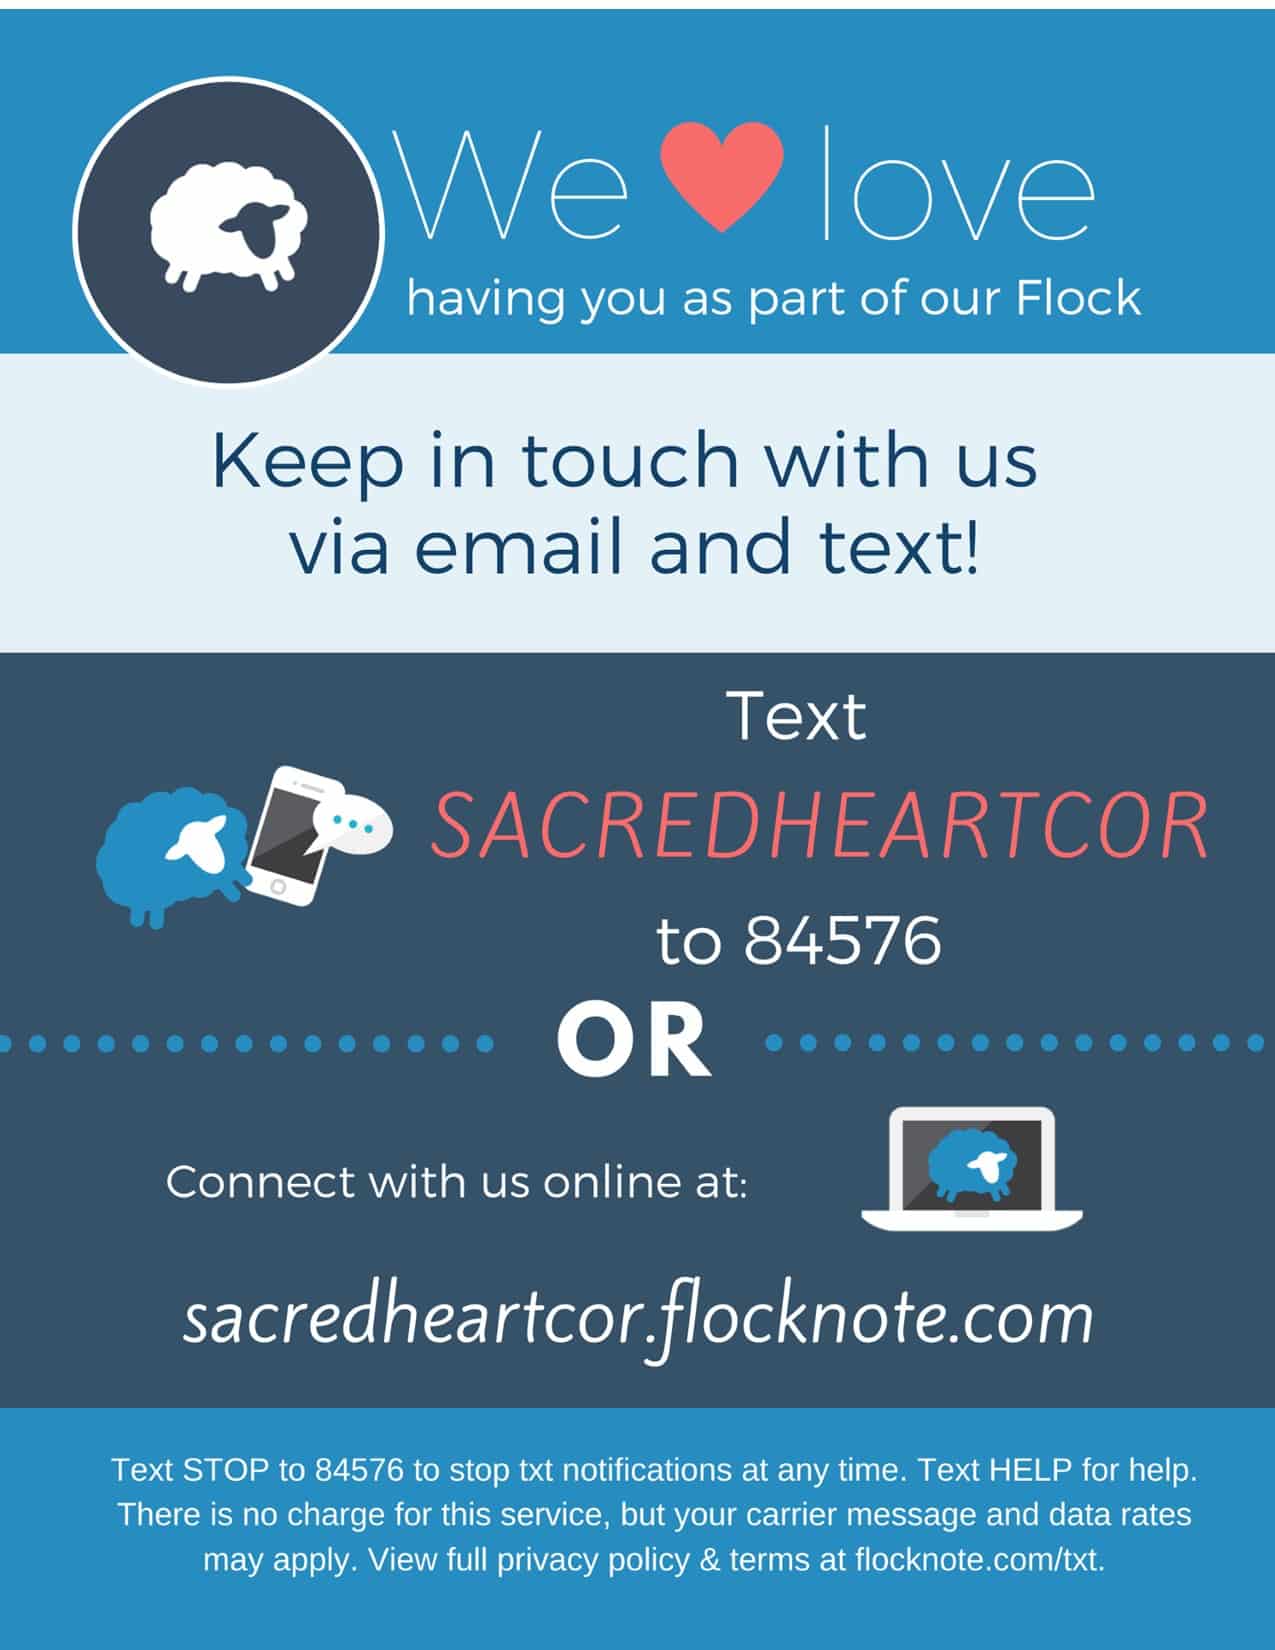 Keep in touch with us via email and text!